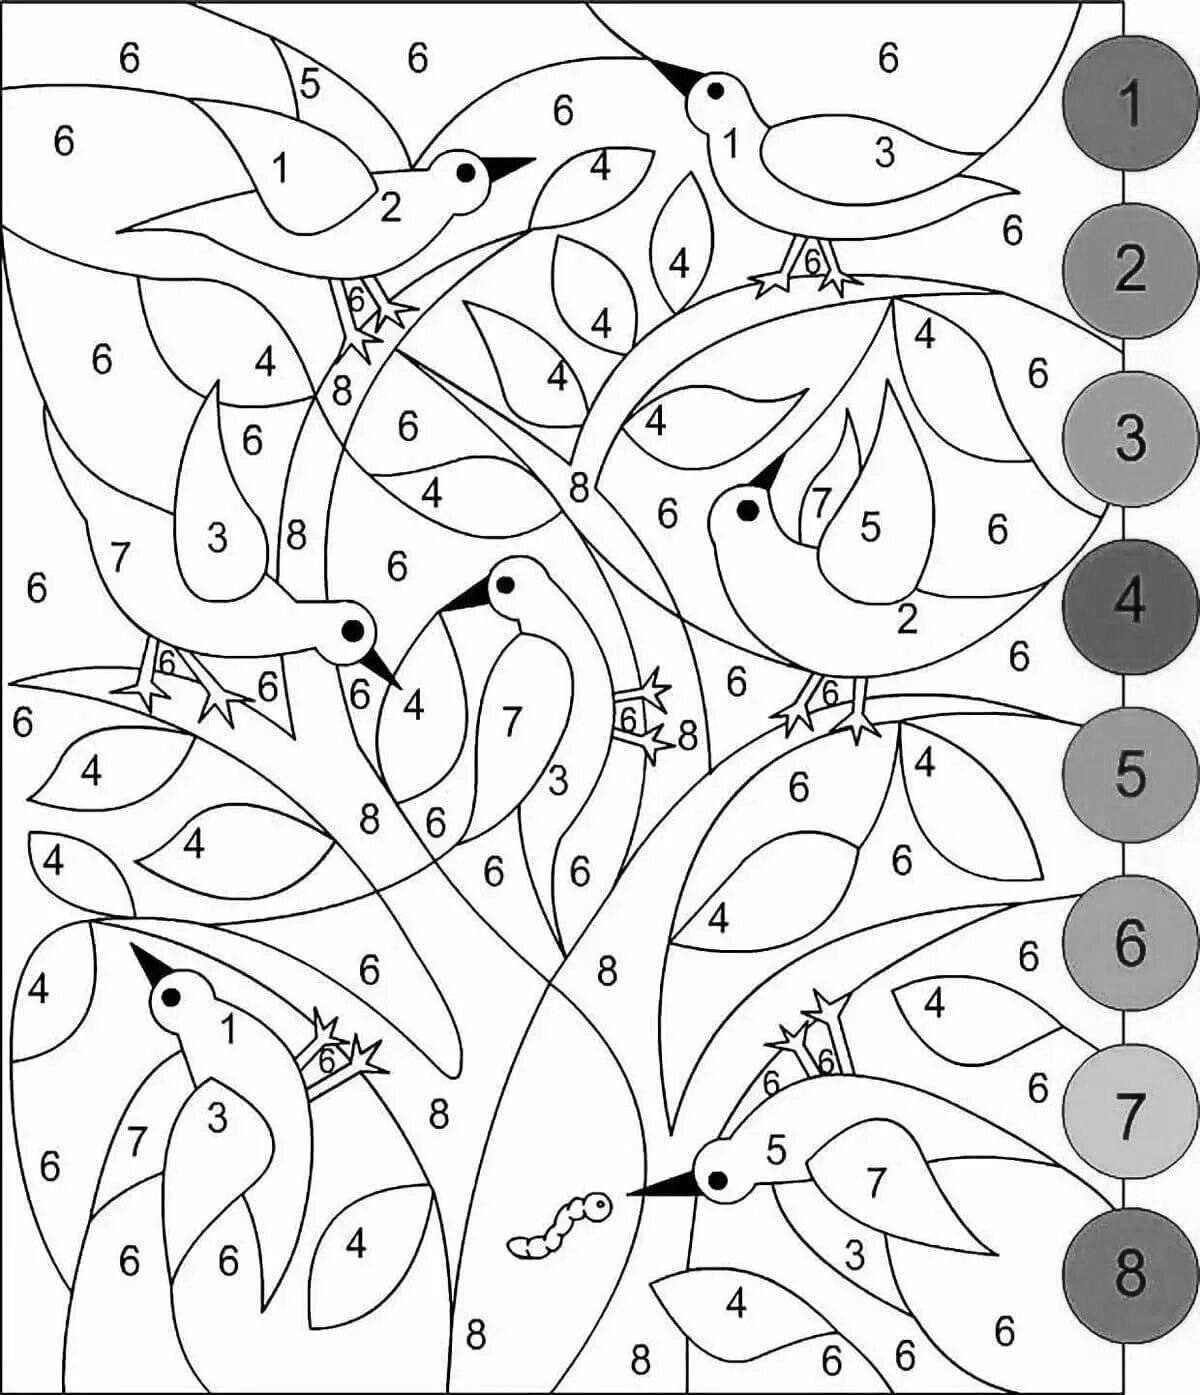 Color-frenzy coloring page by squares with numbers